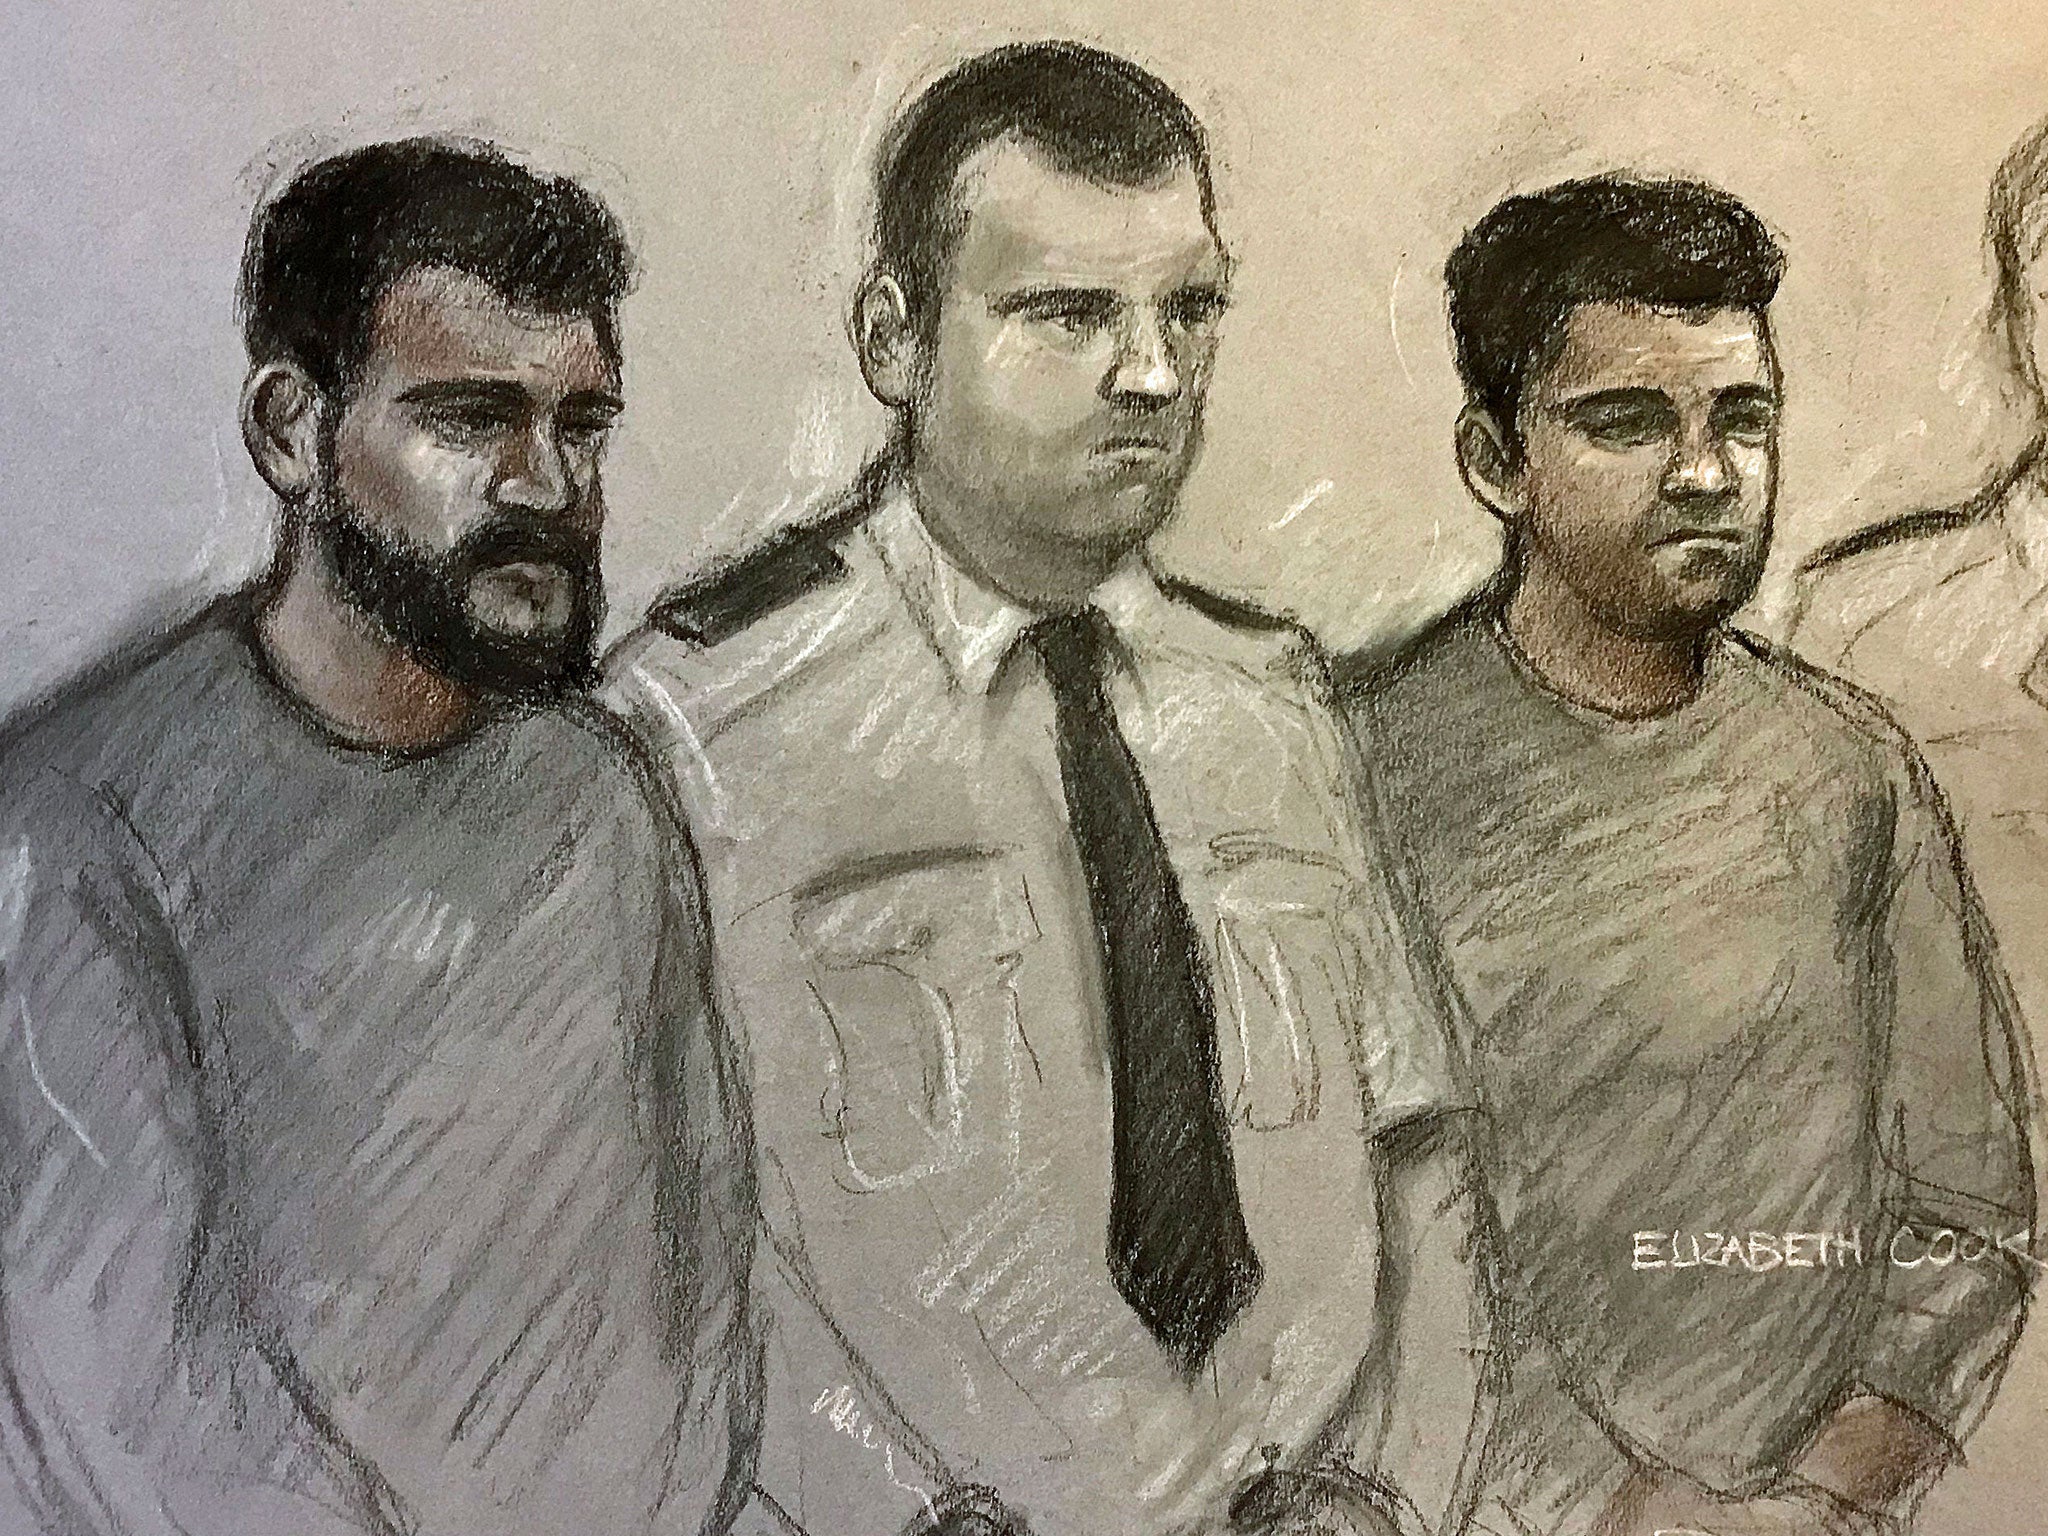 Farhad Salah (left) and Andy Star (right) at Westminster Magistrates’ Court in London